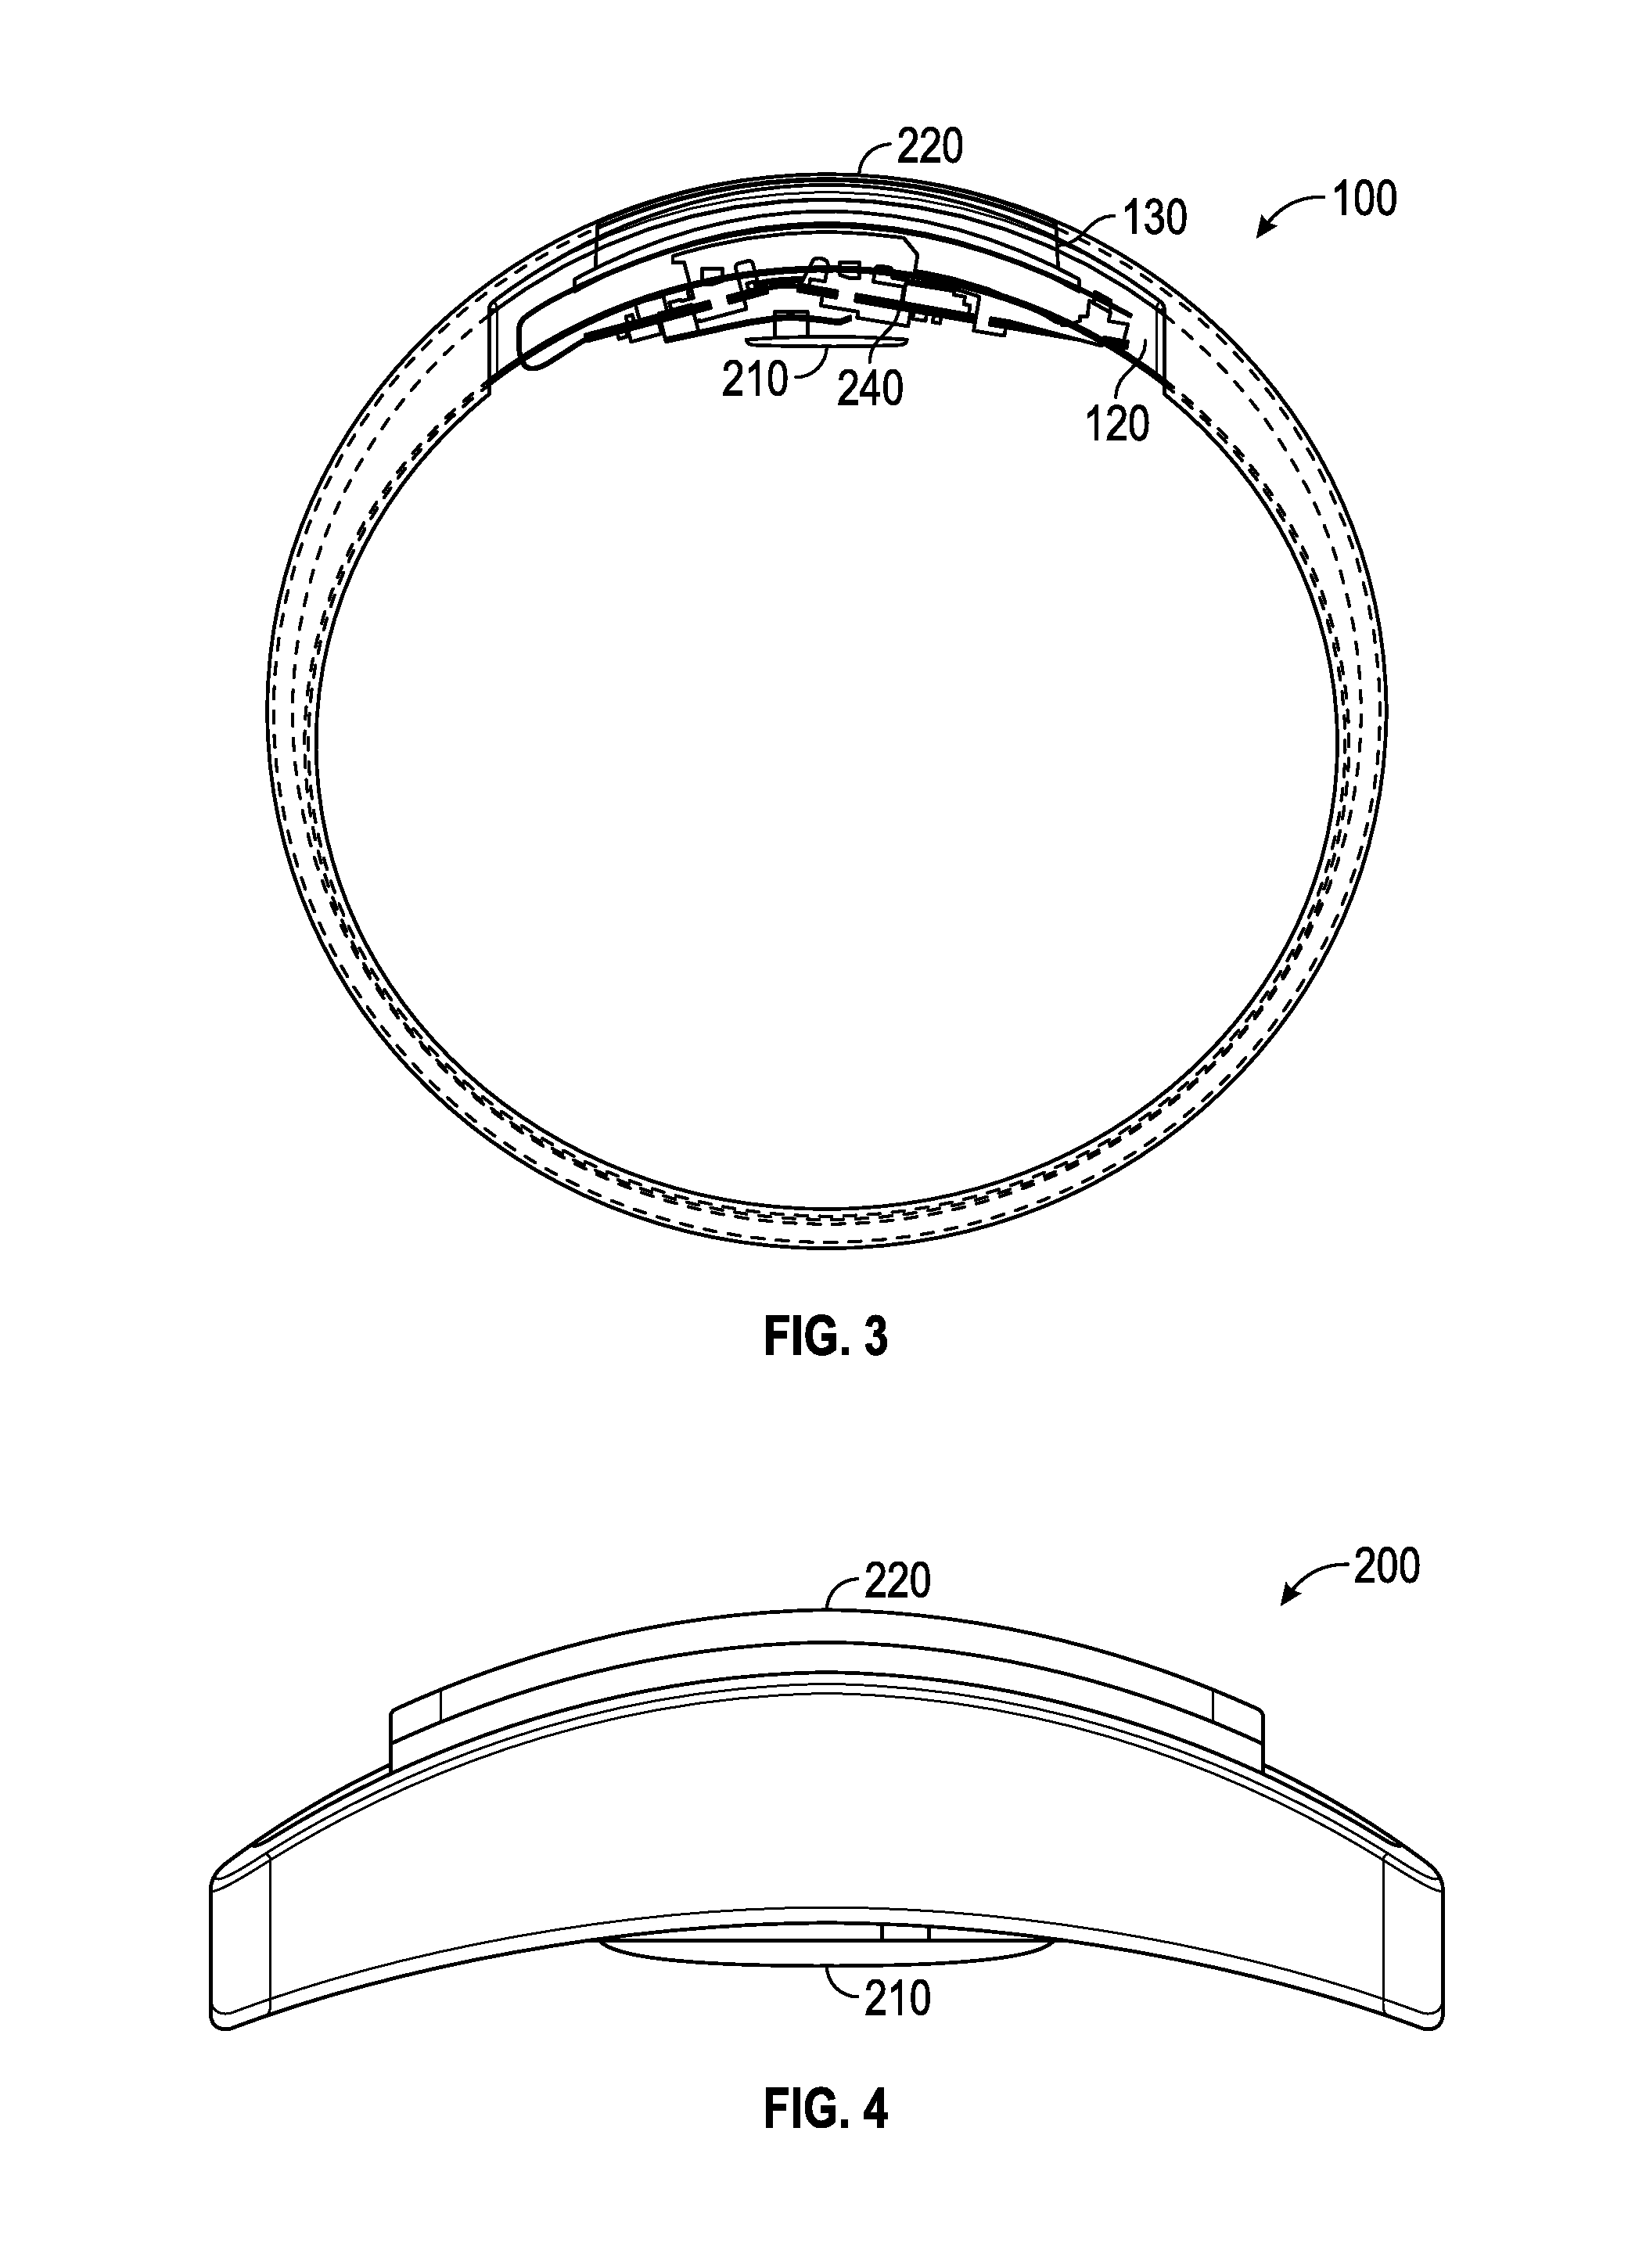 Wristband with removable activity monitoring device